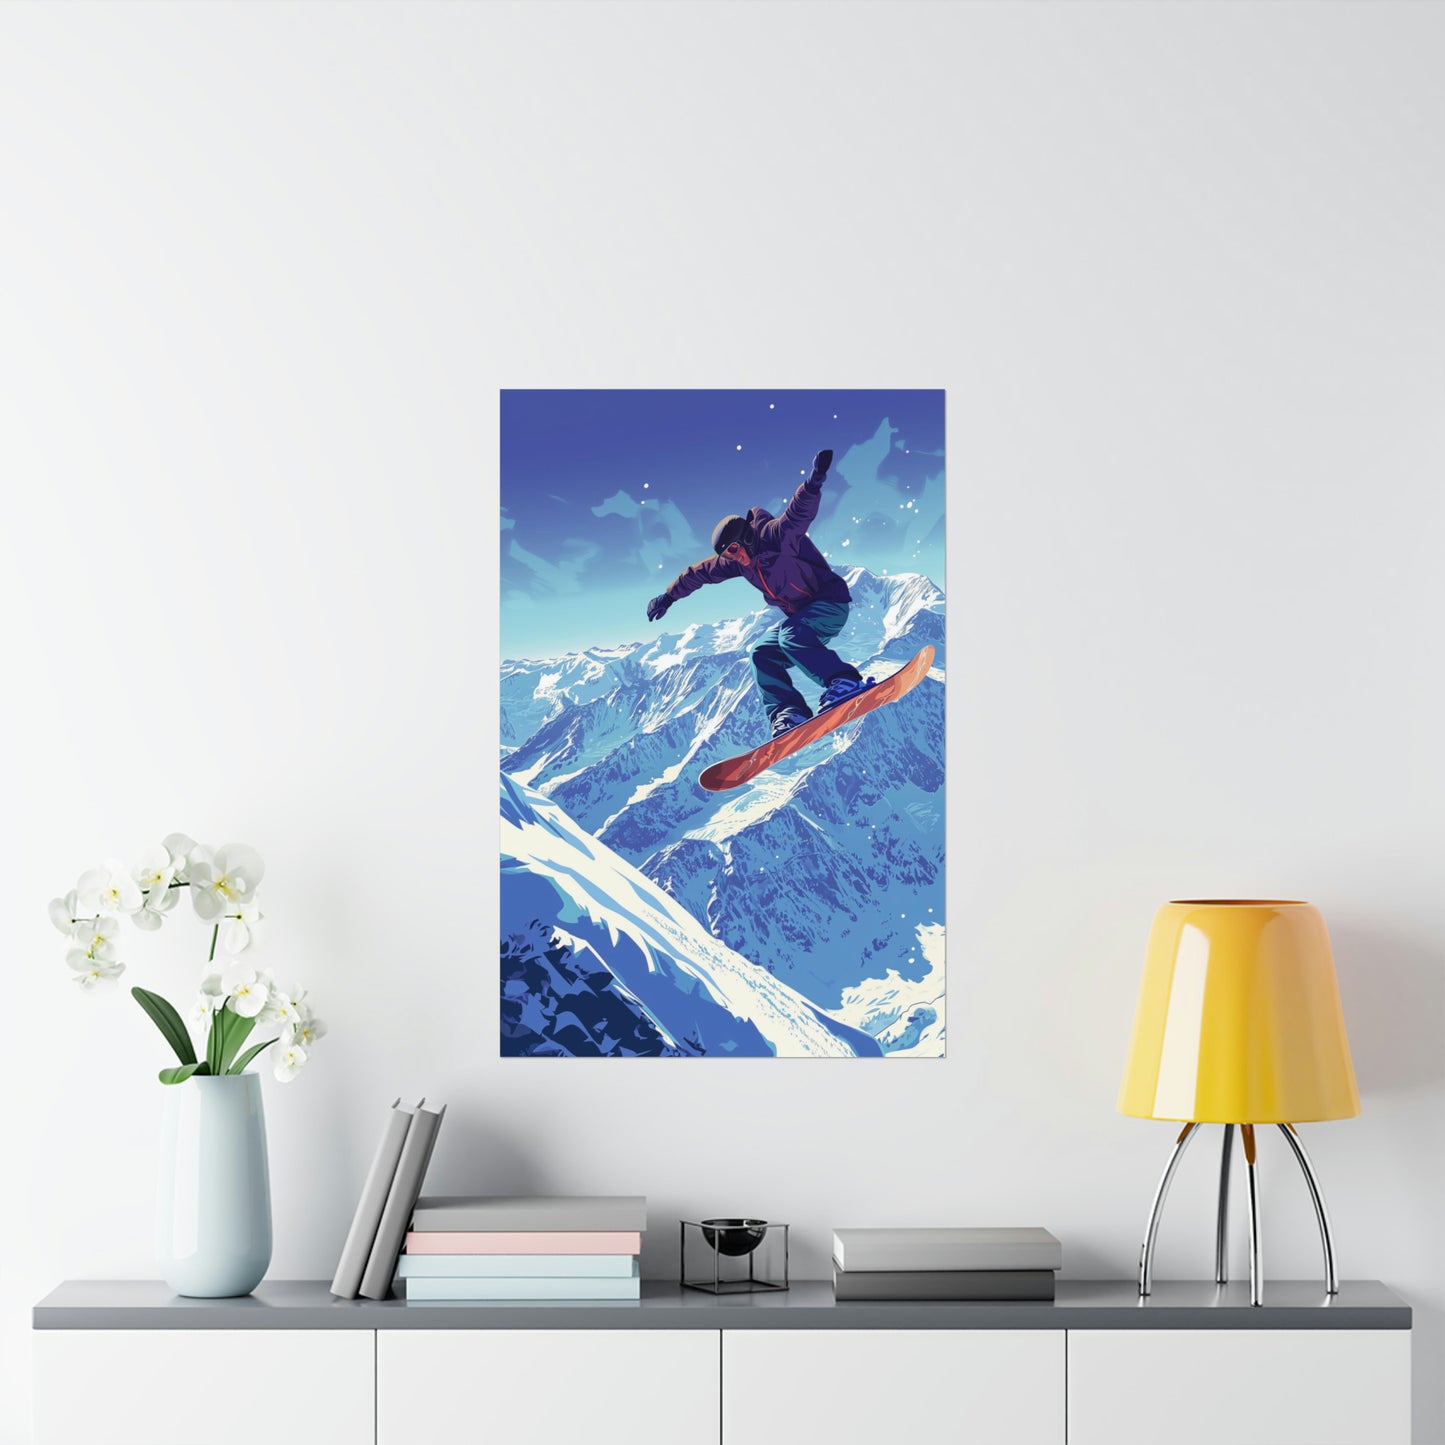 Snowboarder Jumping Poster Print, Snow Snowboard Mountain Winter Sport Vintage Retro Wall Art Vertical Paper Artwork Small Large Cool Decor